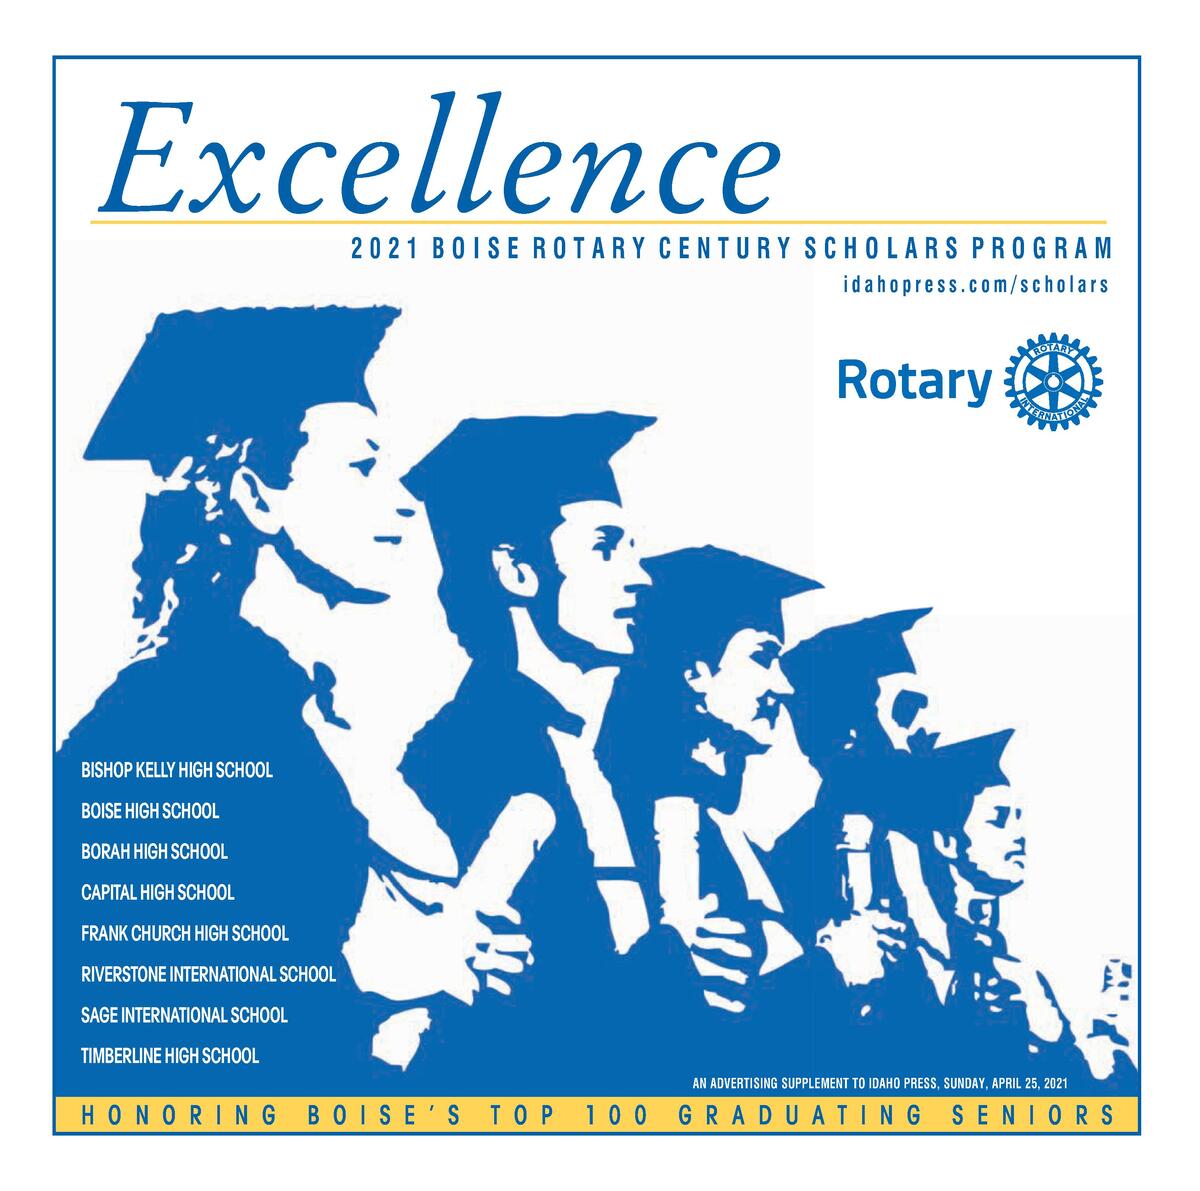 2021 Boise Rotary Century Scholars picture